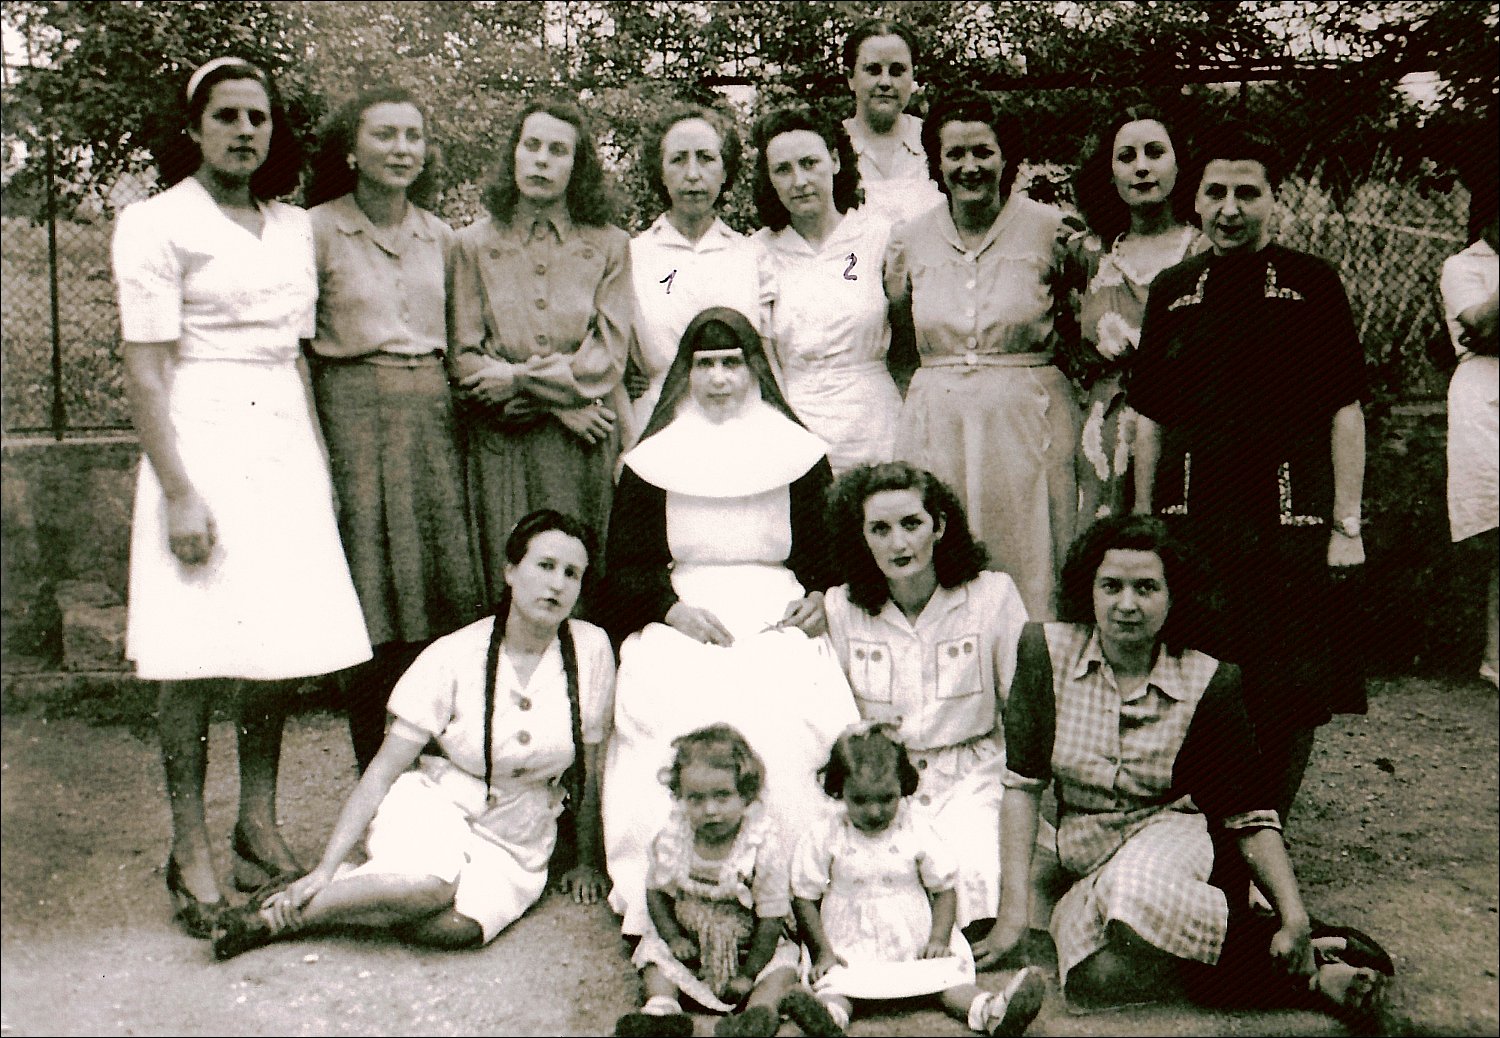 PERSONAL ARCHIVE OF MARIA SALVO IBORRA. Group photo in the yard of the prison, n/d.